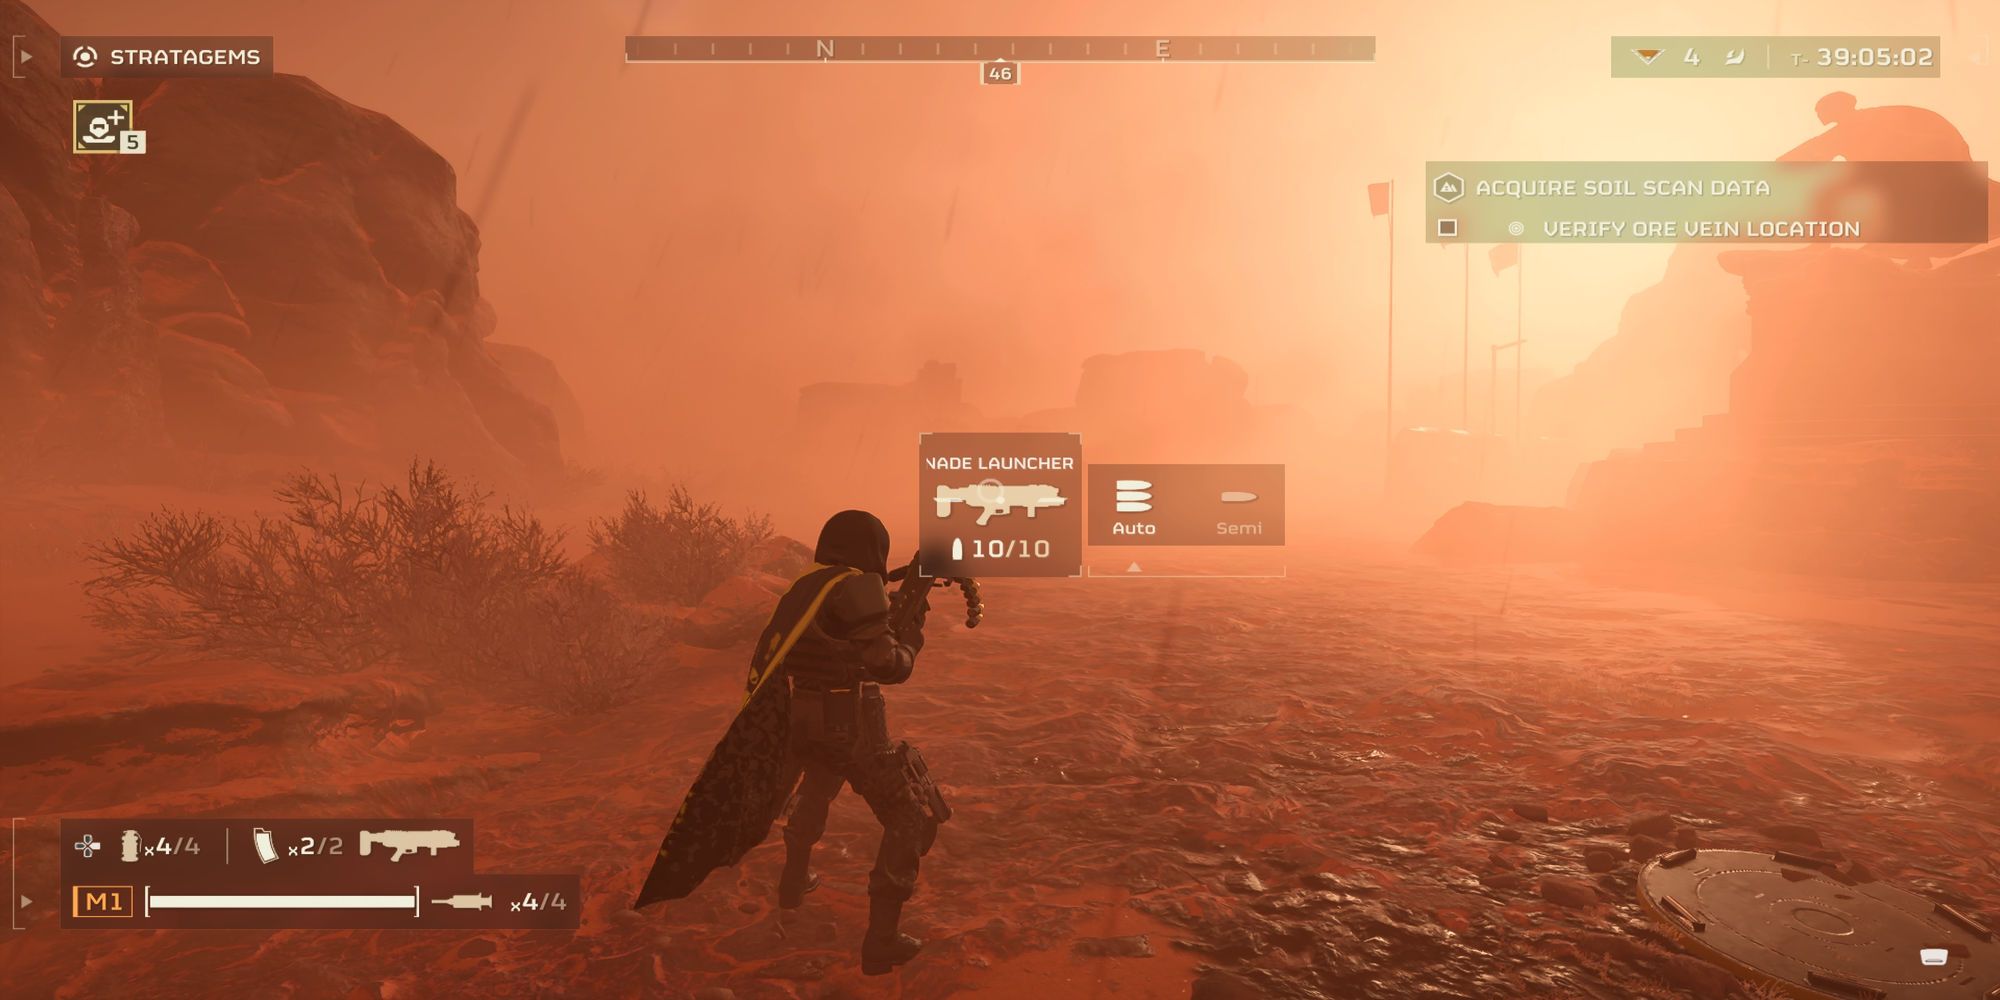 A player pulls up the grenade launcher's settings during a mission